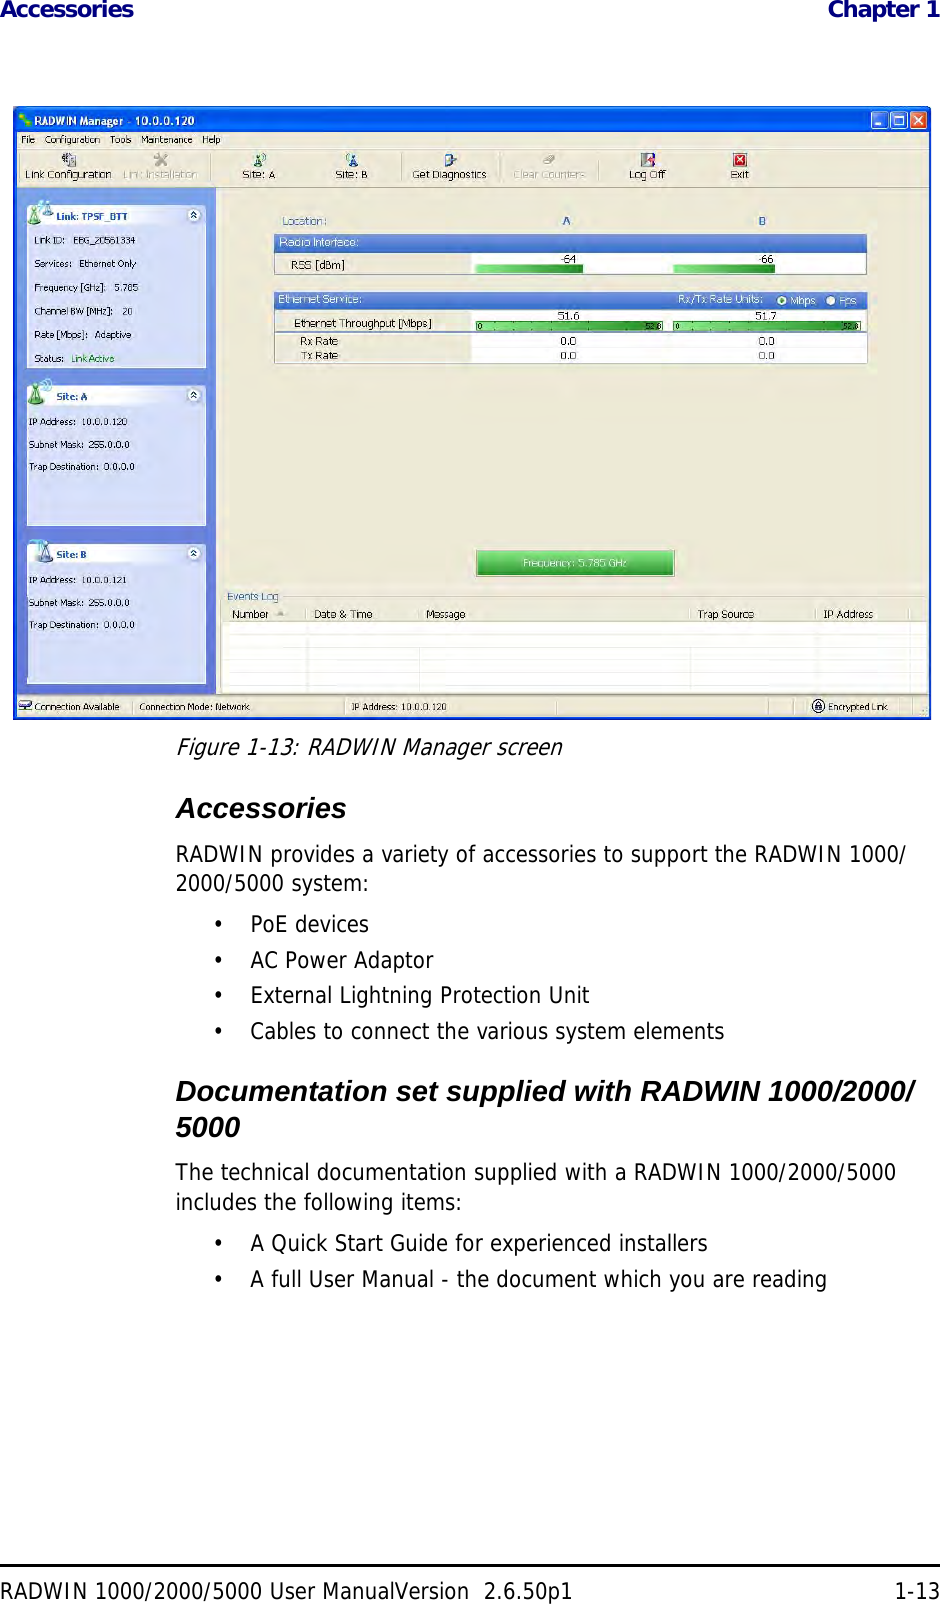 Accessories  Chapter 1RADWIN 1000/2000/5000 User ManualVersion  2.6.50p1 1-13Figure 1-13: RADWIN Manager screenAccessoriesRADWIN provides a variety of accessories to support the RADWIN 1000/2000/5000 system:•PoE devices•AC Power Adaptor• External Lightning Protection Unit• Cables to connect the various system elementsDocumentation set supplied with RADWIN 1000/2000/5000The technical documentation supplied with a RADWIN 1000/2000/5000 includes the following items:• A Quick Start Guide for experienced installers• A full User Manual - the document which you are reading